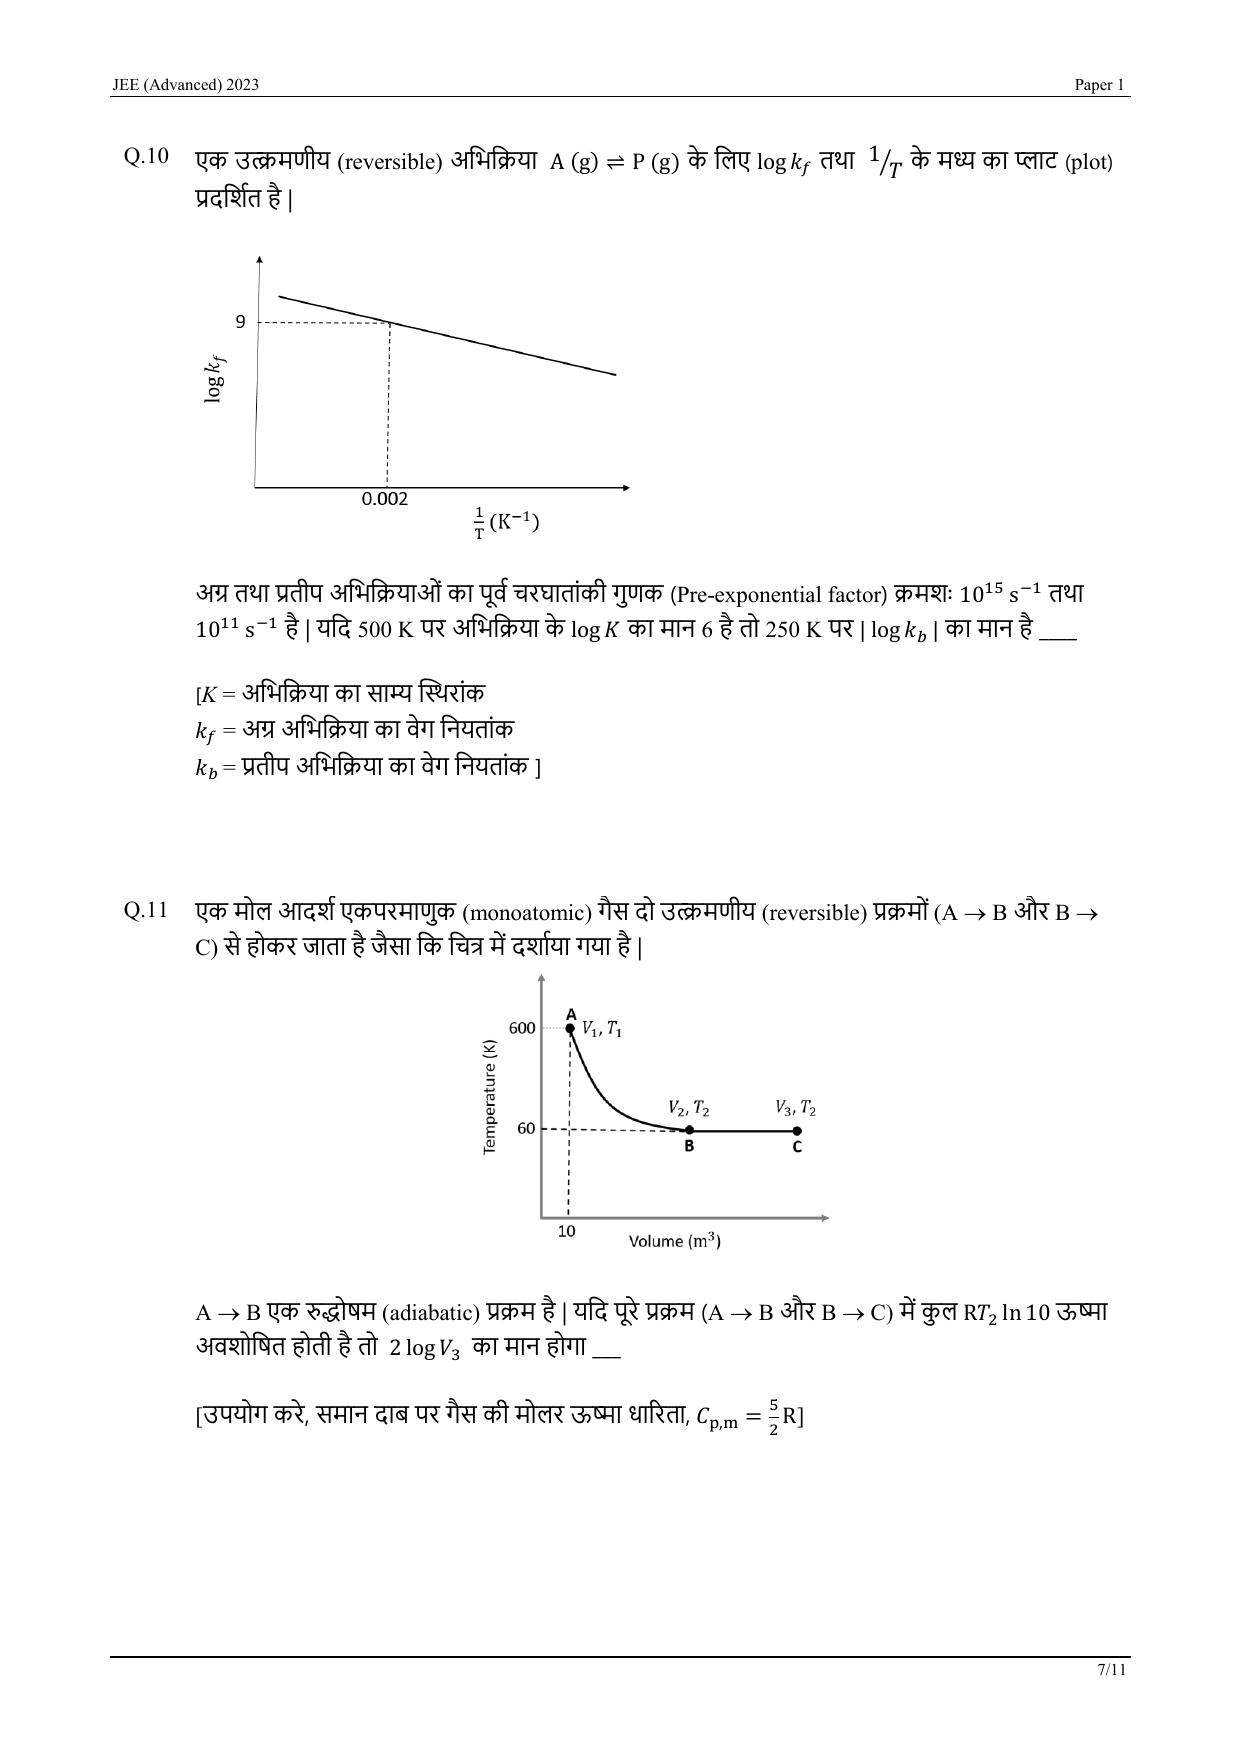 JEE Advanced 2023 Question Paper 1 (Hindi) - Page 27